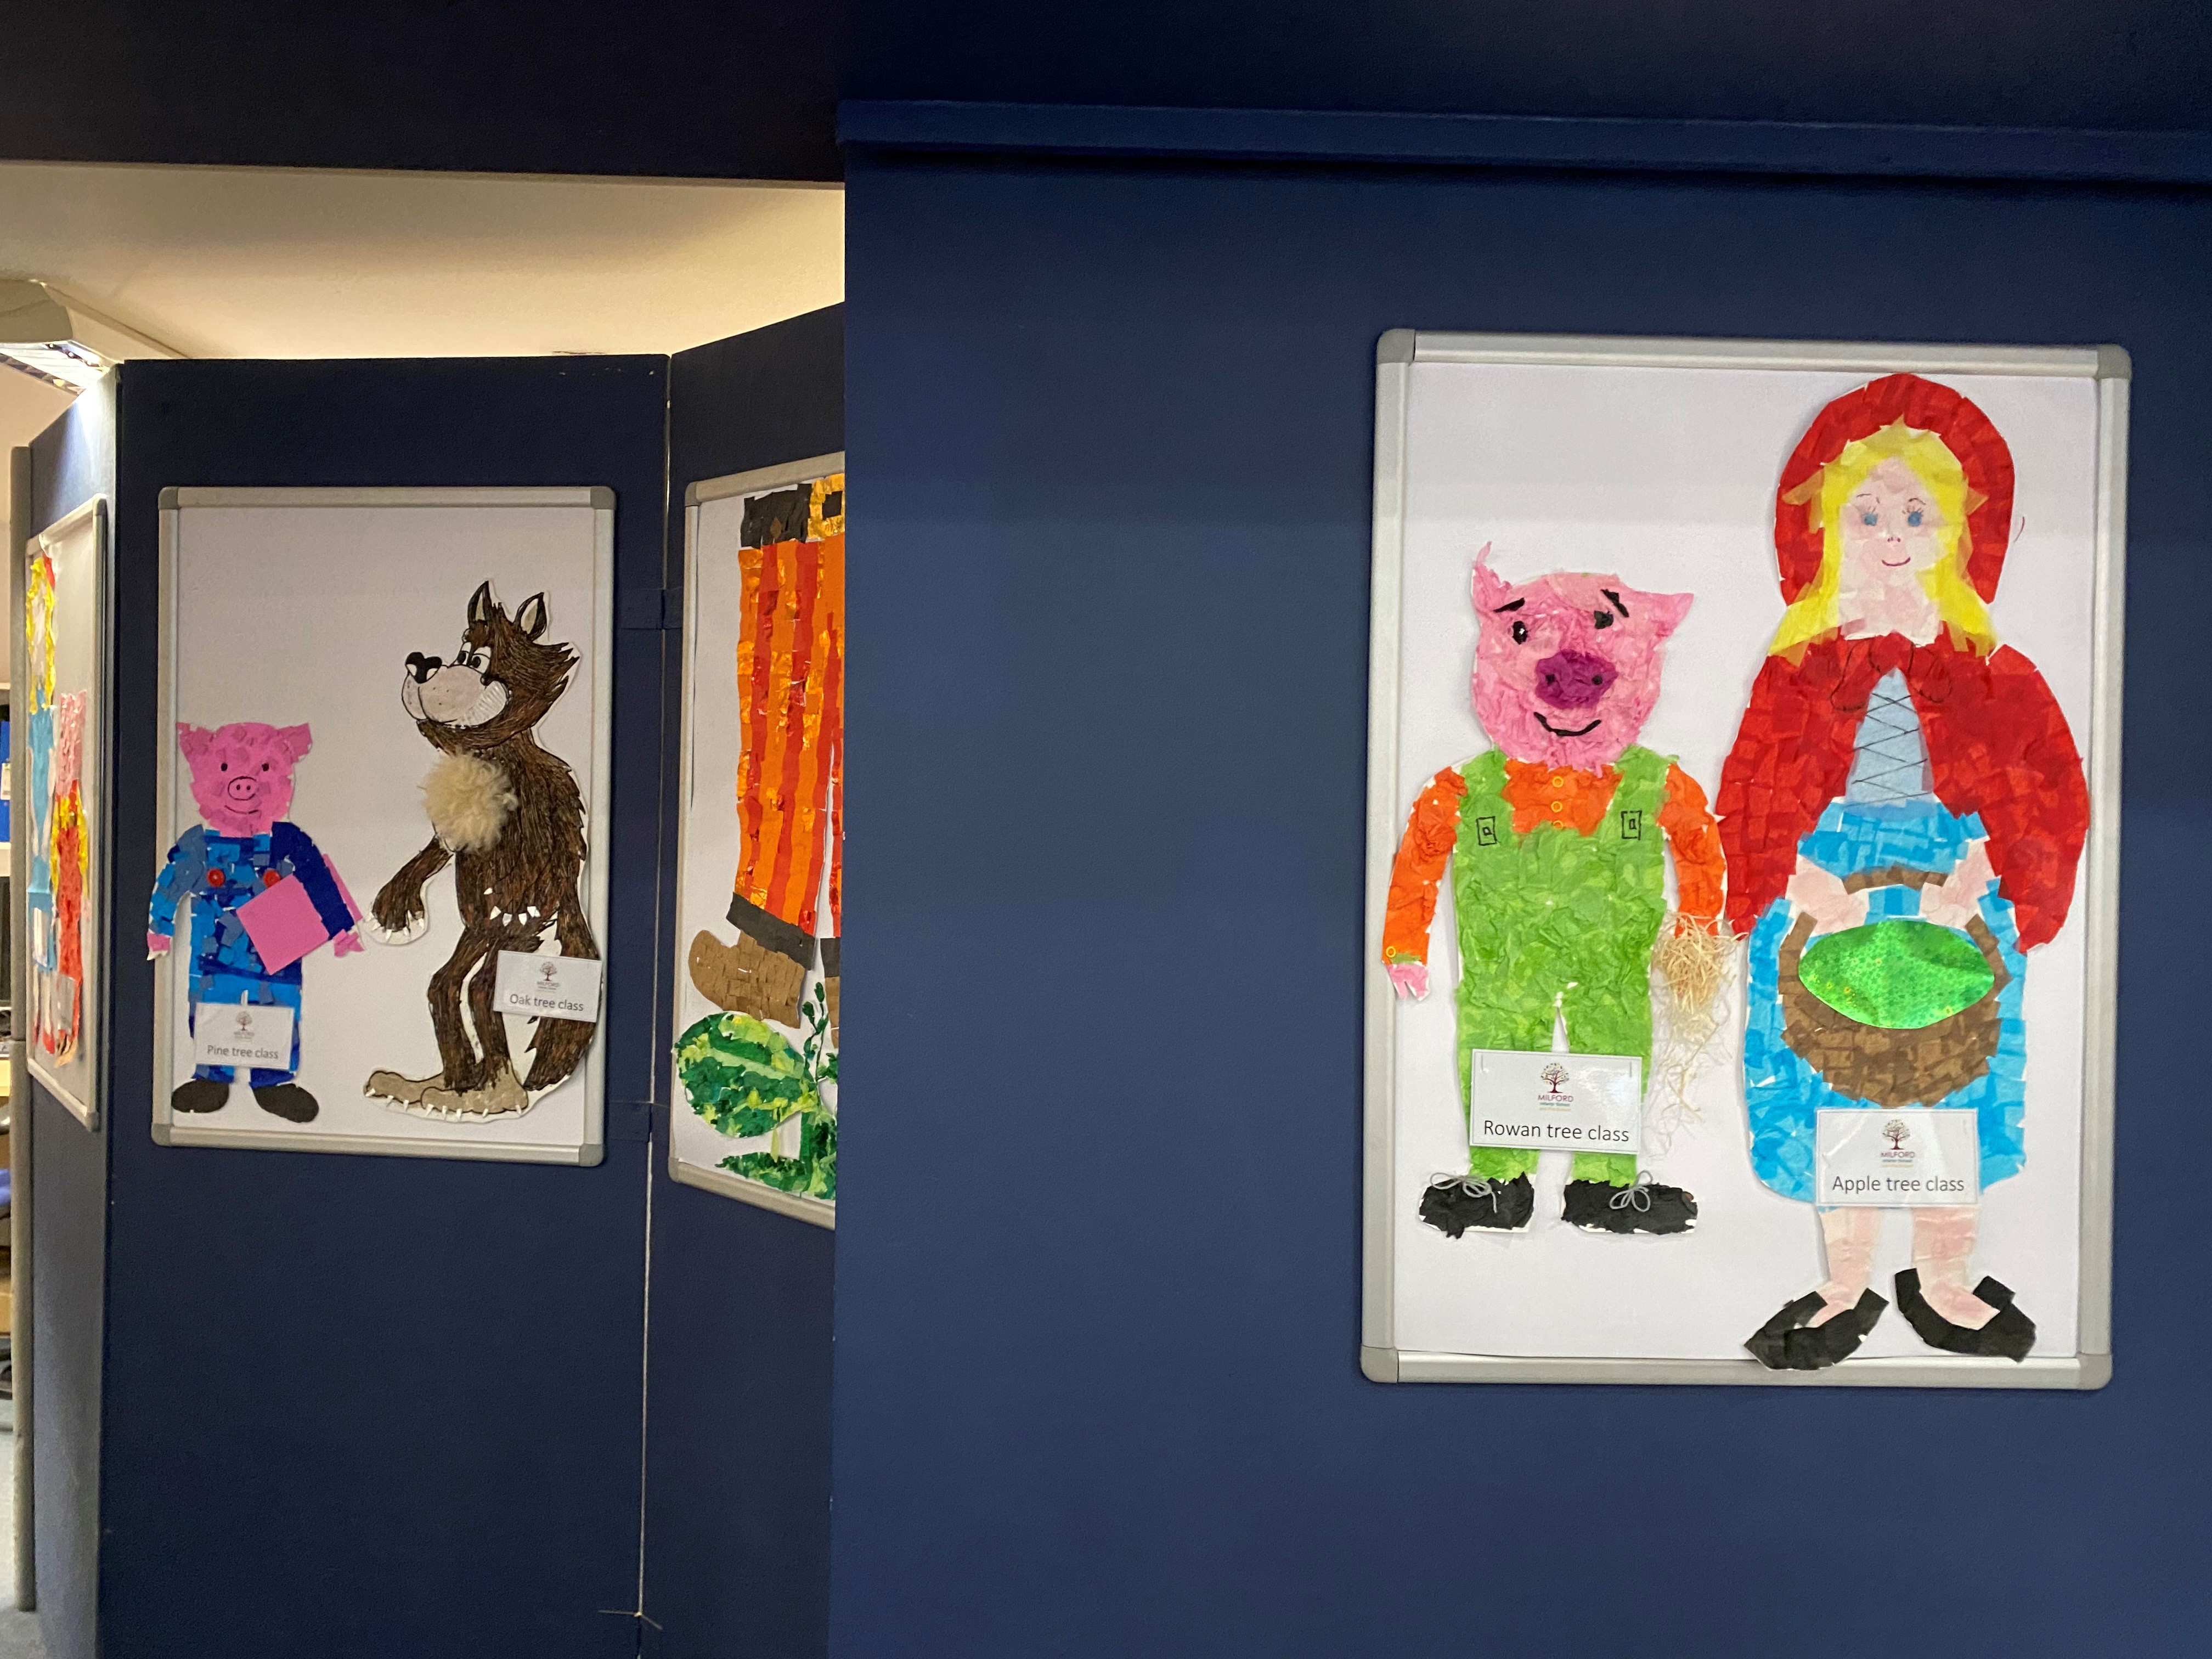 Red Riding Hood, 3 Little Pigs, Giant from Jack & The Bean Stalk by Milford Infants